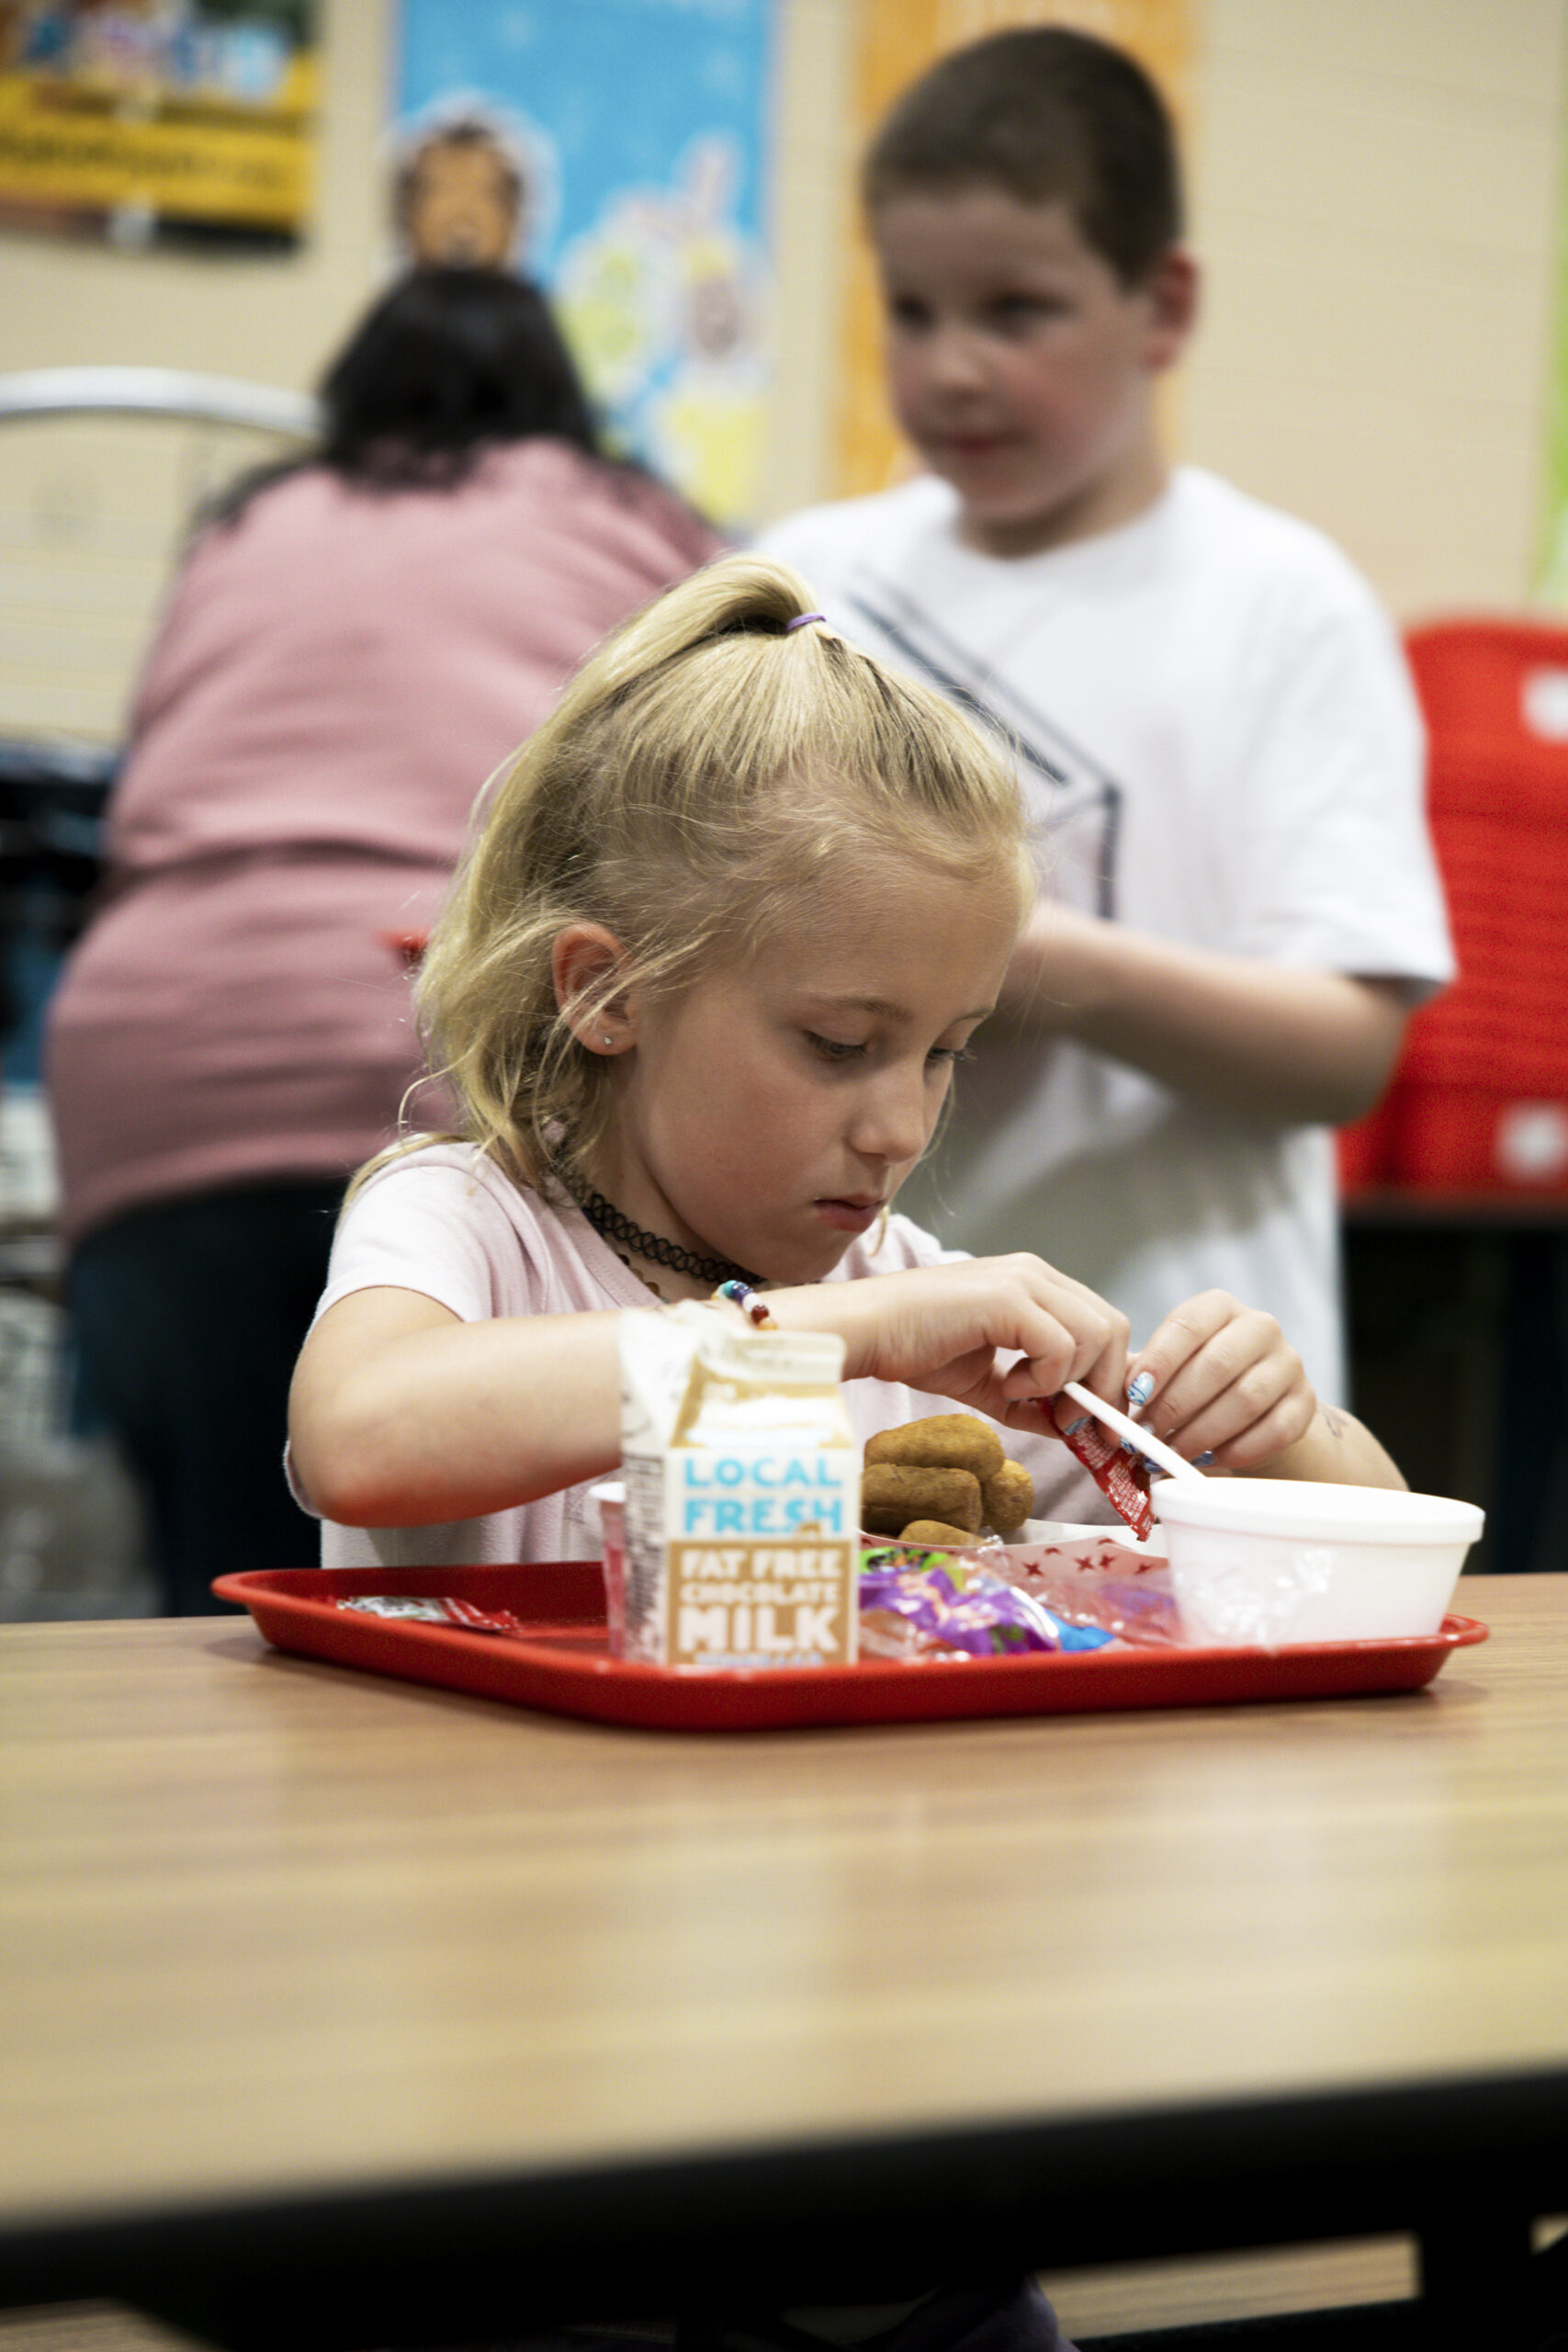 A child eats lunch at school